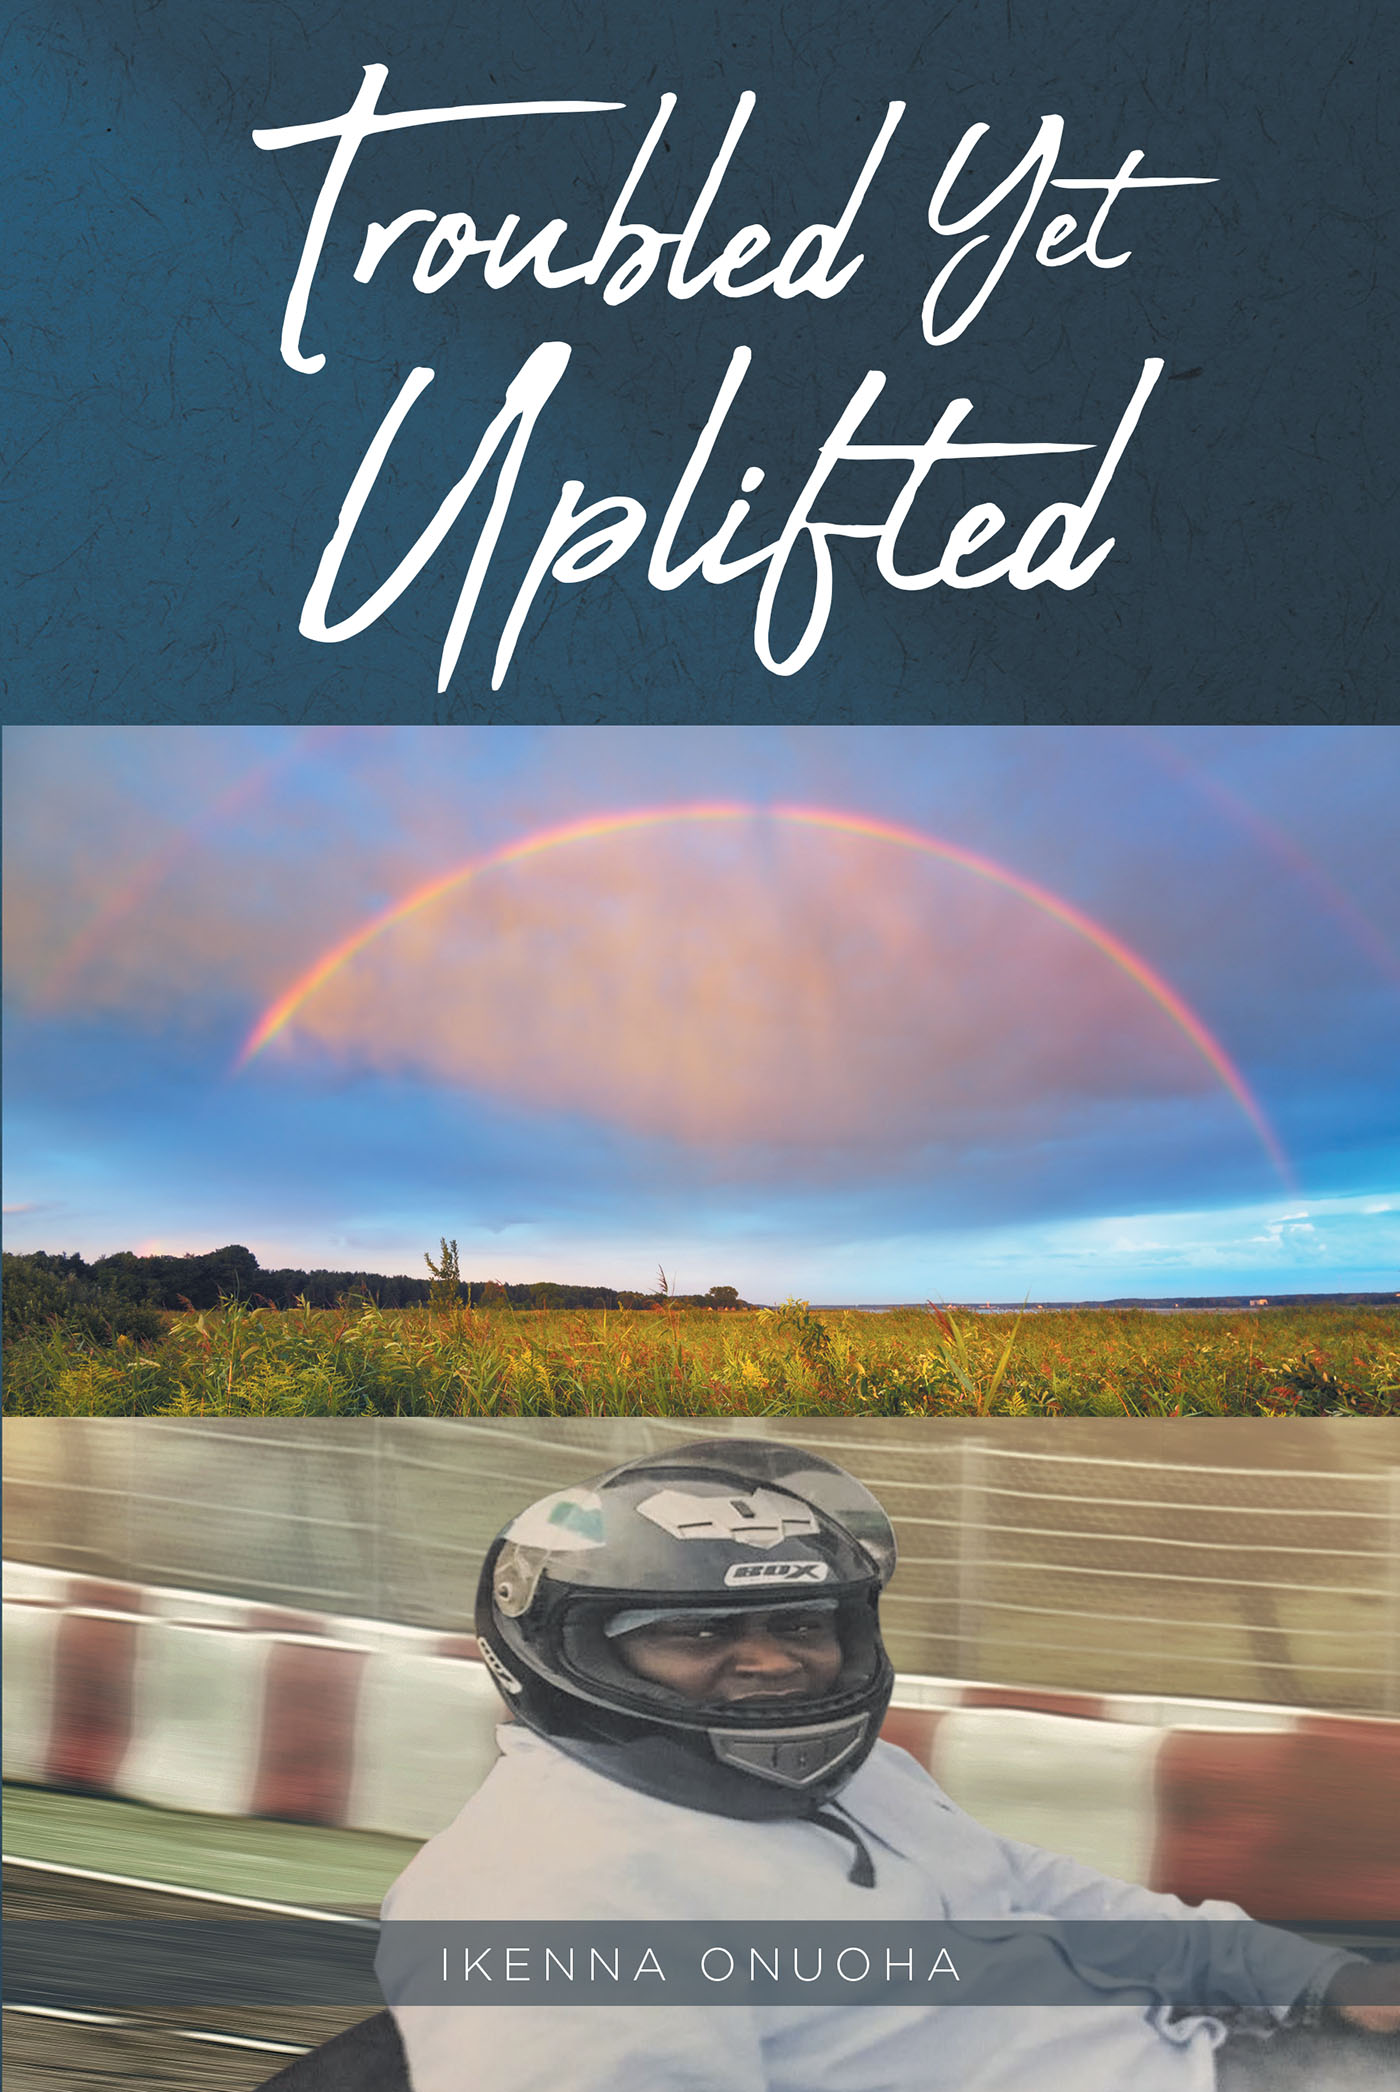 Ikenna Onuoha’s New Book, "Troubled Yet Uplifted," Recounts the Author's Experiences While Imprisoned and How He Learned to Survive Both Mentally and Physically.